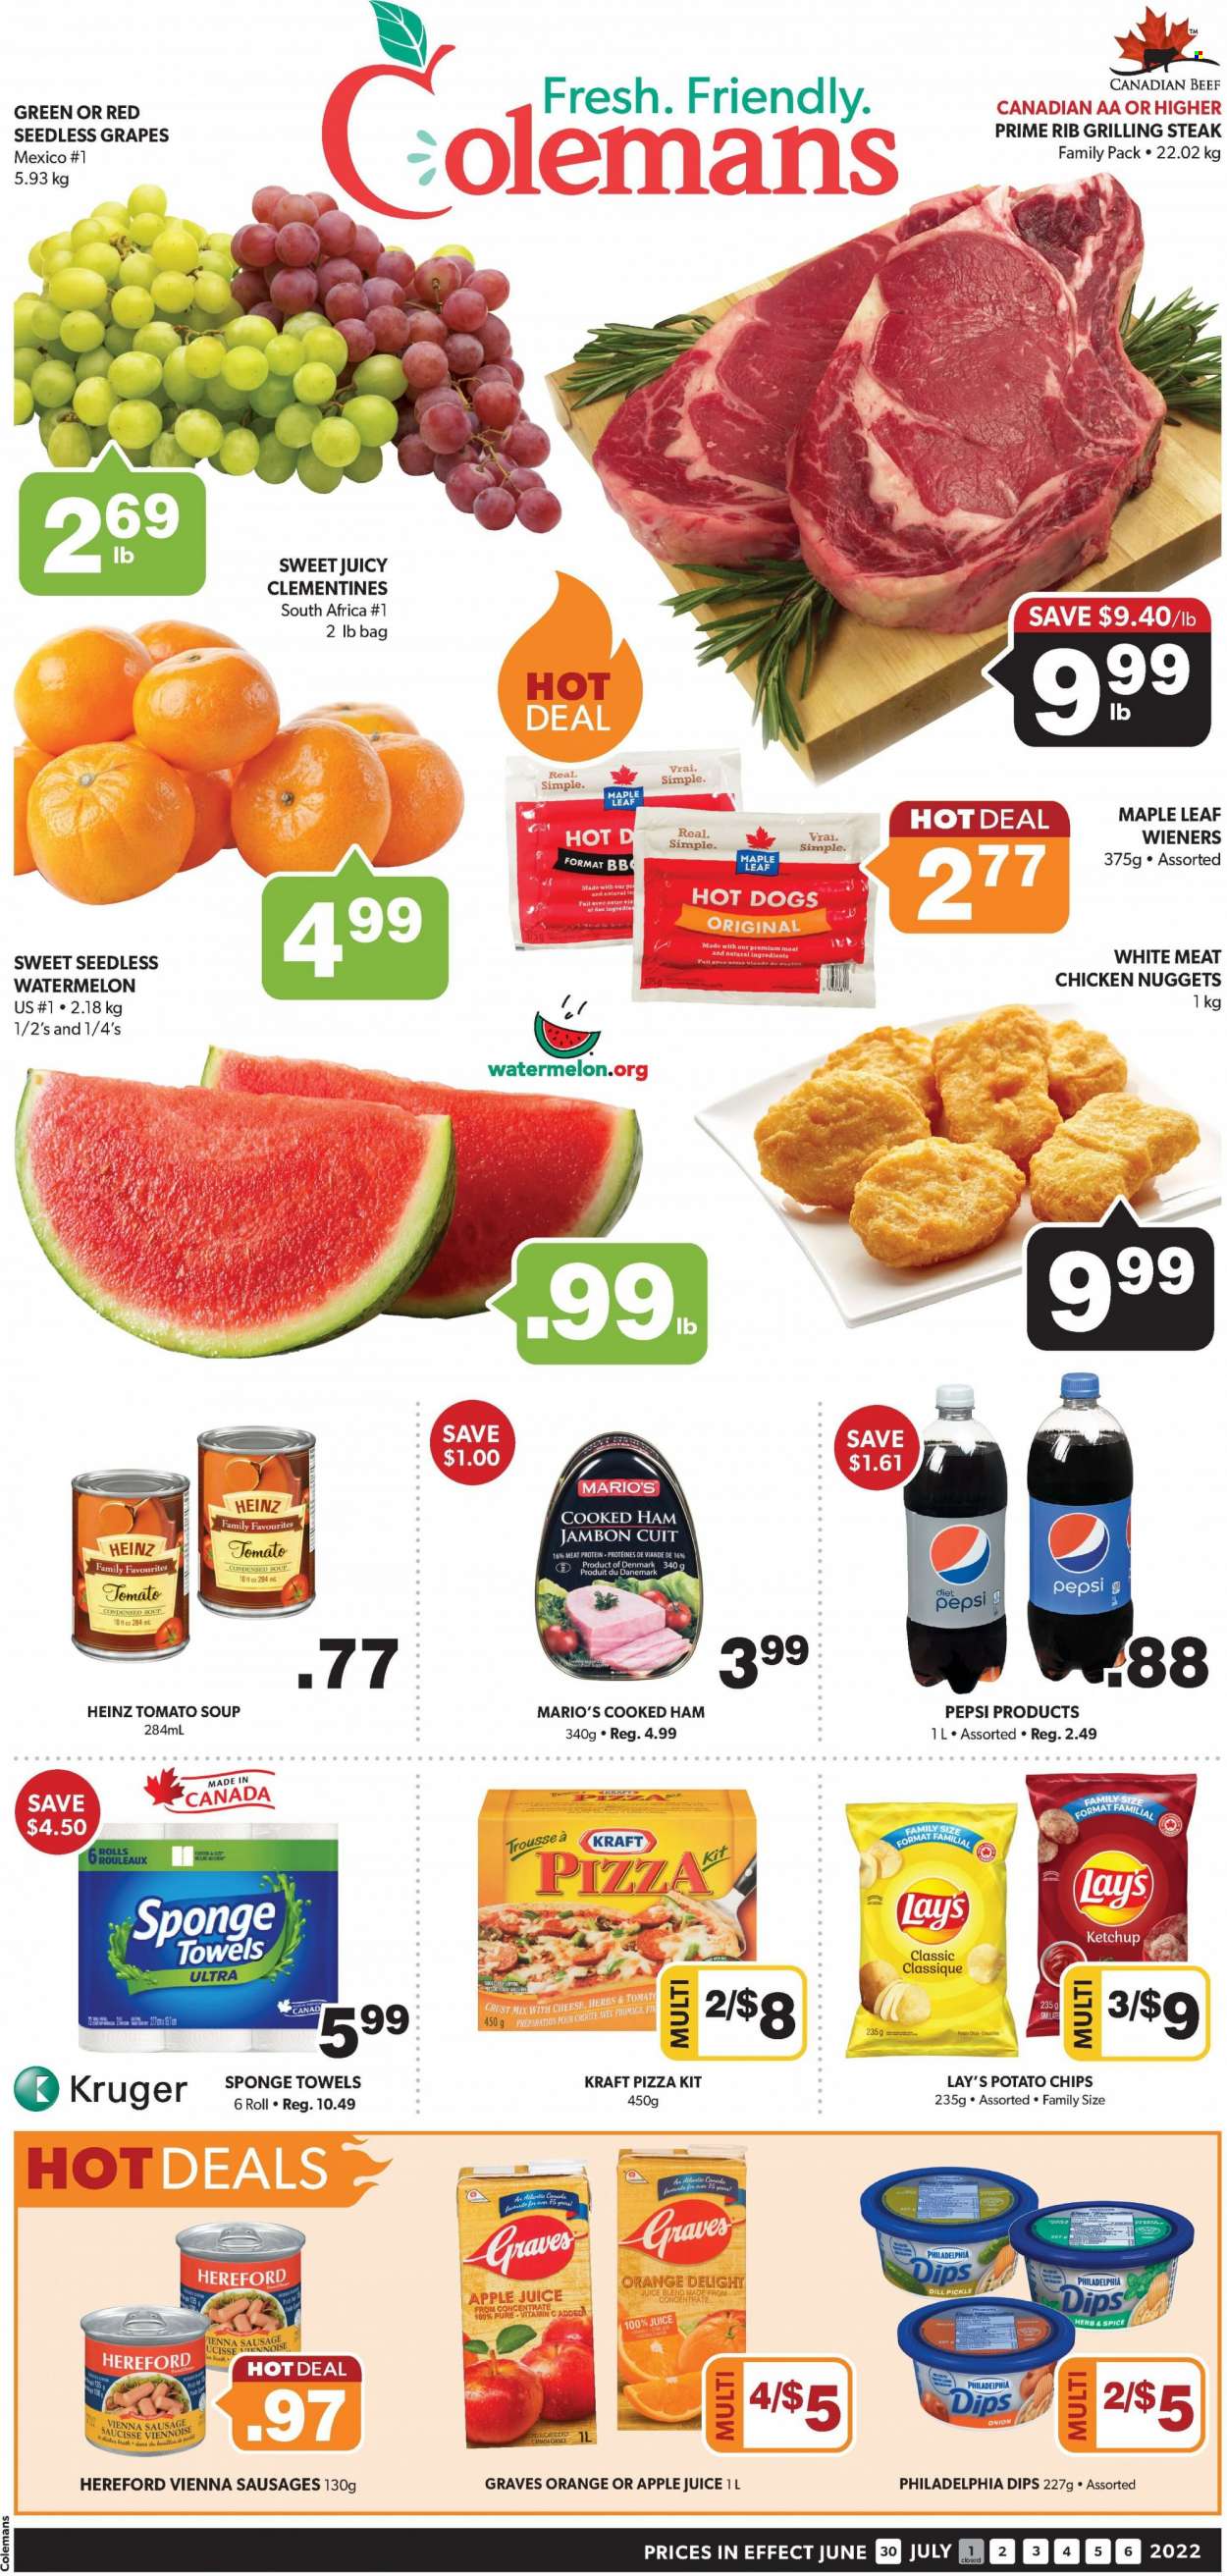 thumbnail - Colemans Flyer - June 30, 2022 - July 06, 2022 - Sales products - clementines, grapes, seedless grapes, watermelon, tomato soup, hot dog, pizza, condensed soup, soup, nuggets, chicken nuggets, instant soup, Kraft®, cooked ham, ham, sausage, vienna sausage, dill pickle, potato chips, chips, Lay’s, bouillon, chicken broth, broth, dill, spice, apple juice, Pepsi, juice, Diet Pepsi, vitamin c, Heinz, ketchup, Philadelphia, steak, oranges. Page 1.